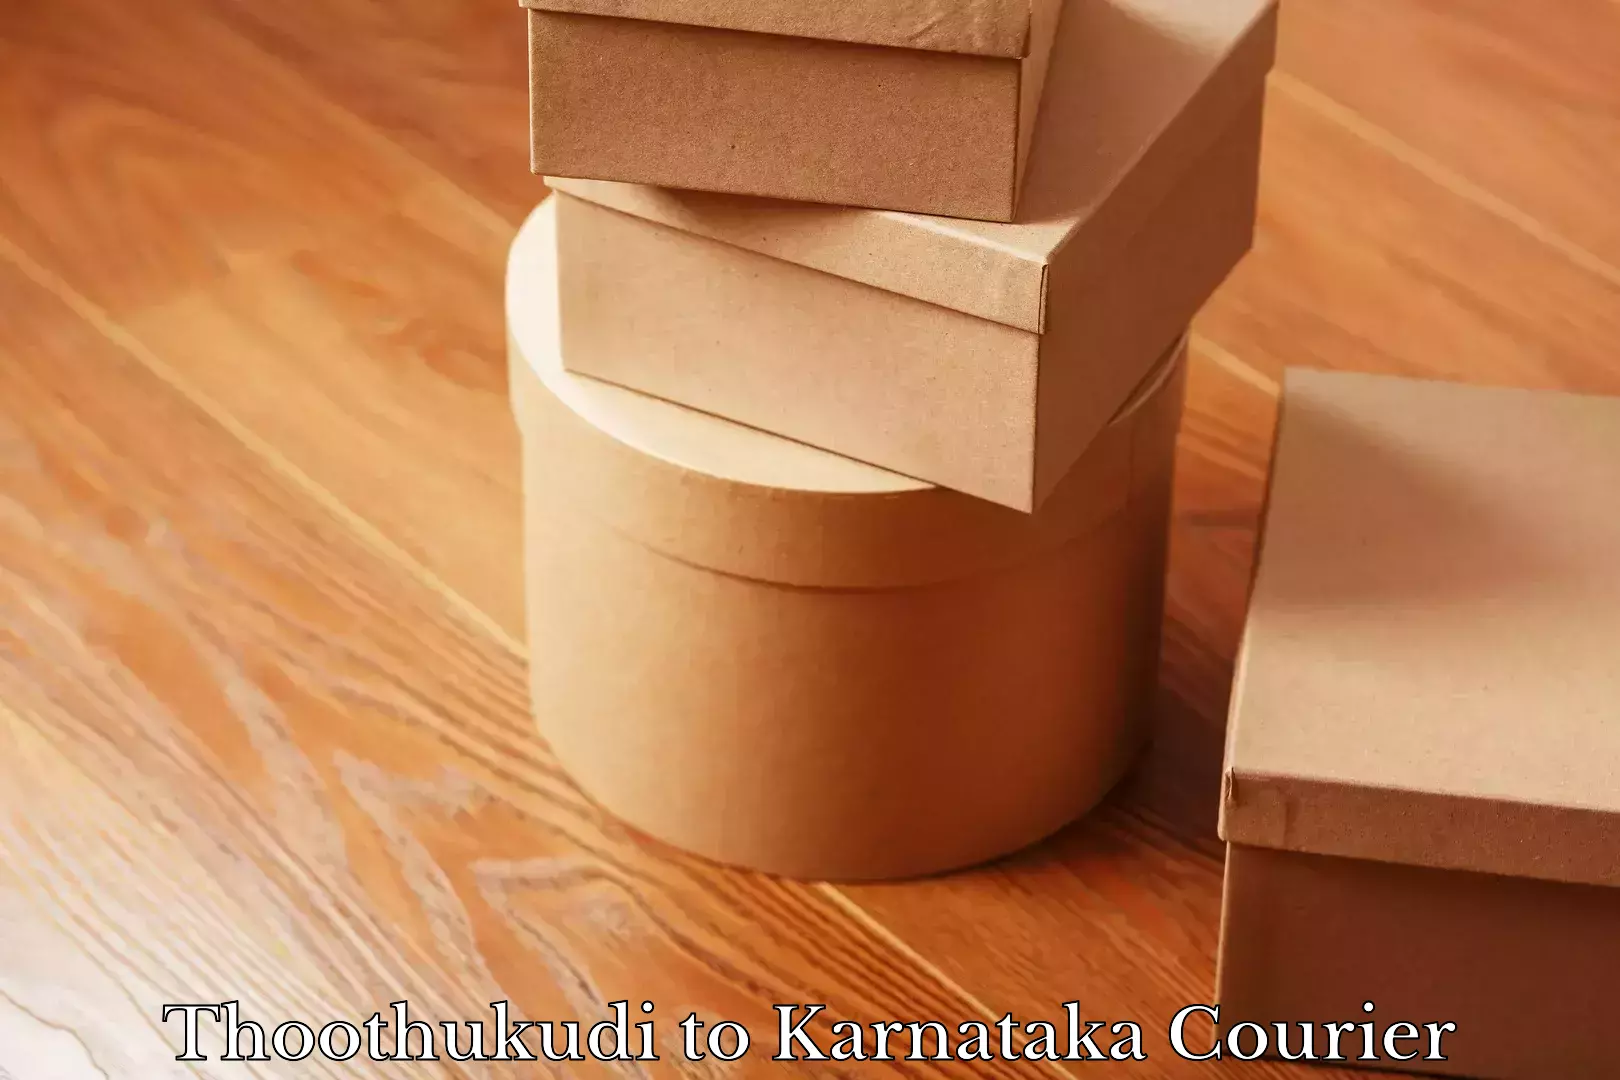 Easy access courier services in Thoothukudi to Karnataka